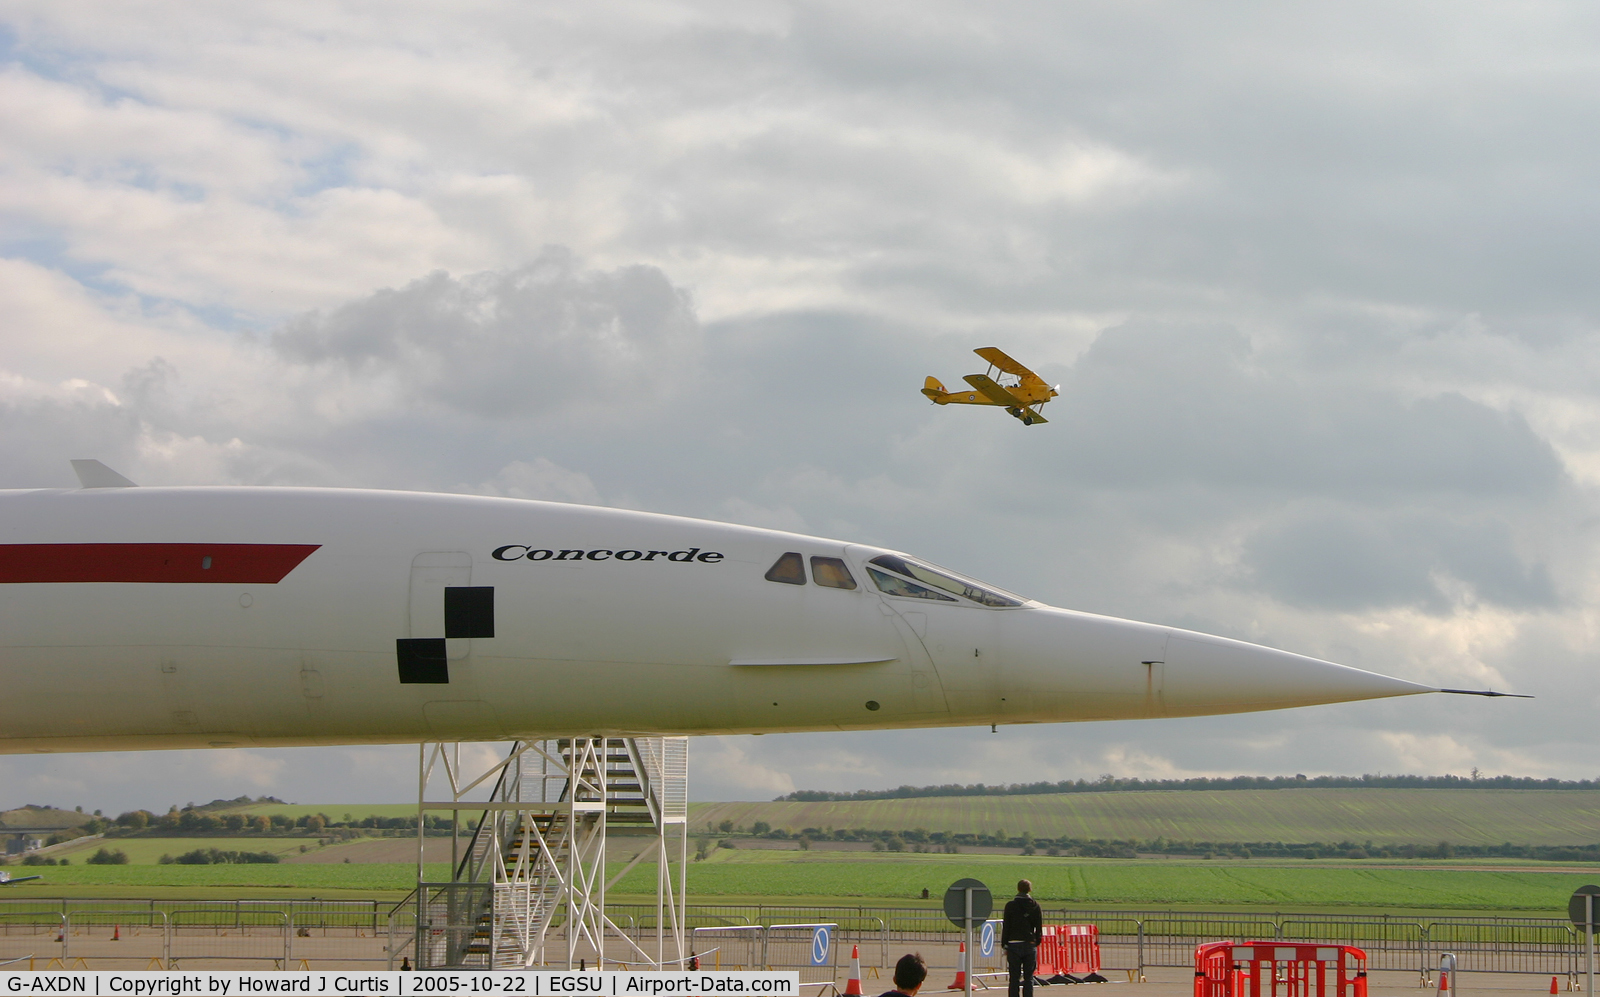 G-AXDN, 1968 Aerospatiale-BAC Concorde Prototype C/N 01/13522, Contrasting the new (sadly grounded) Concorde with the old (still flying) Tiger Moth behind.